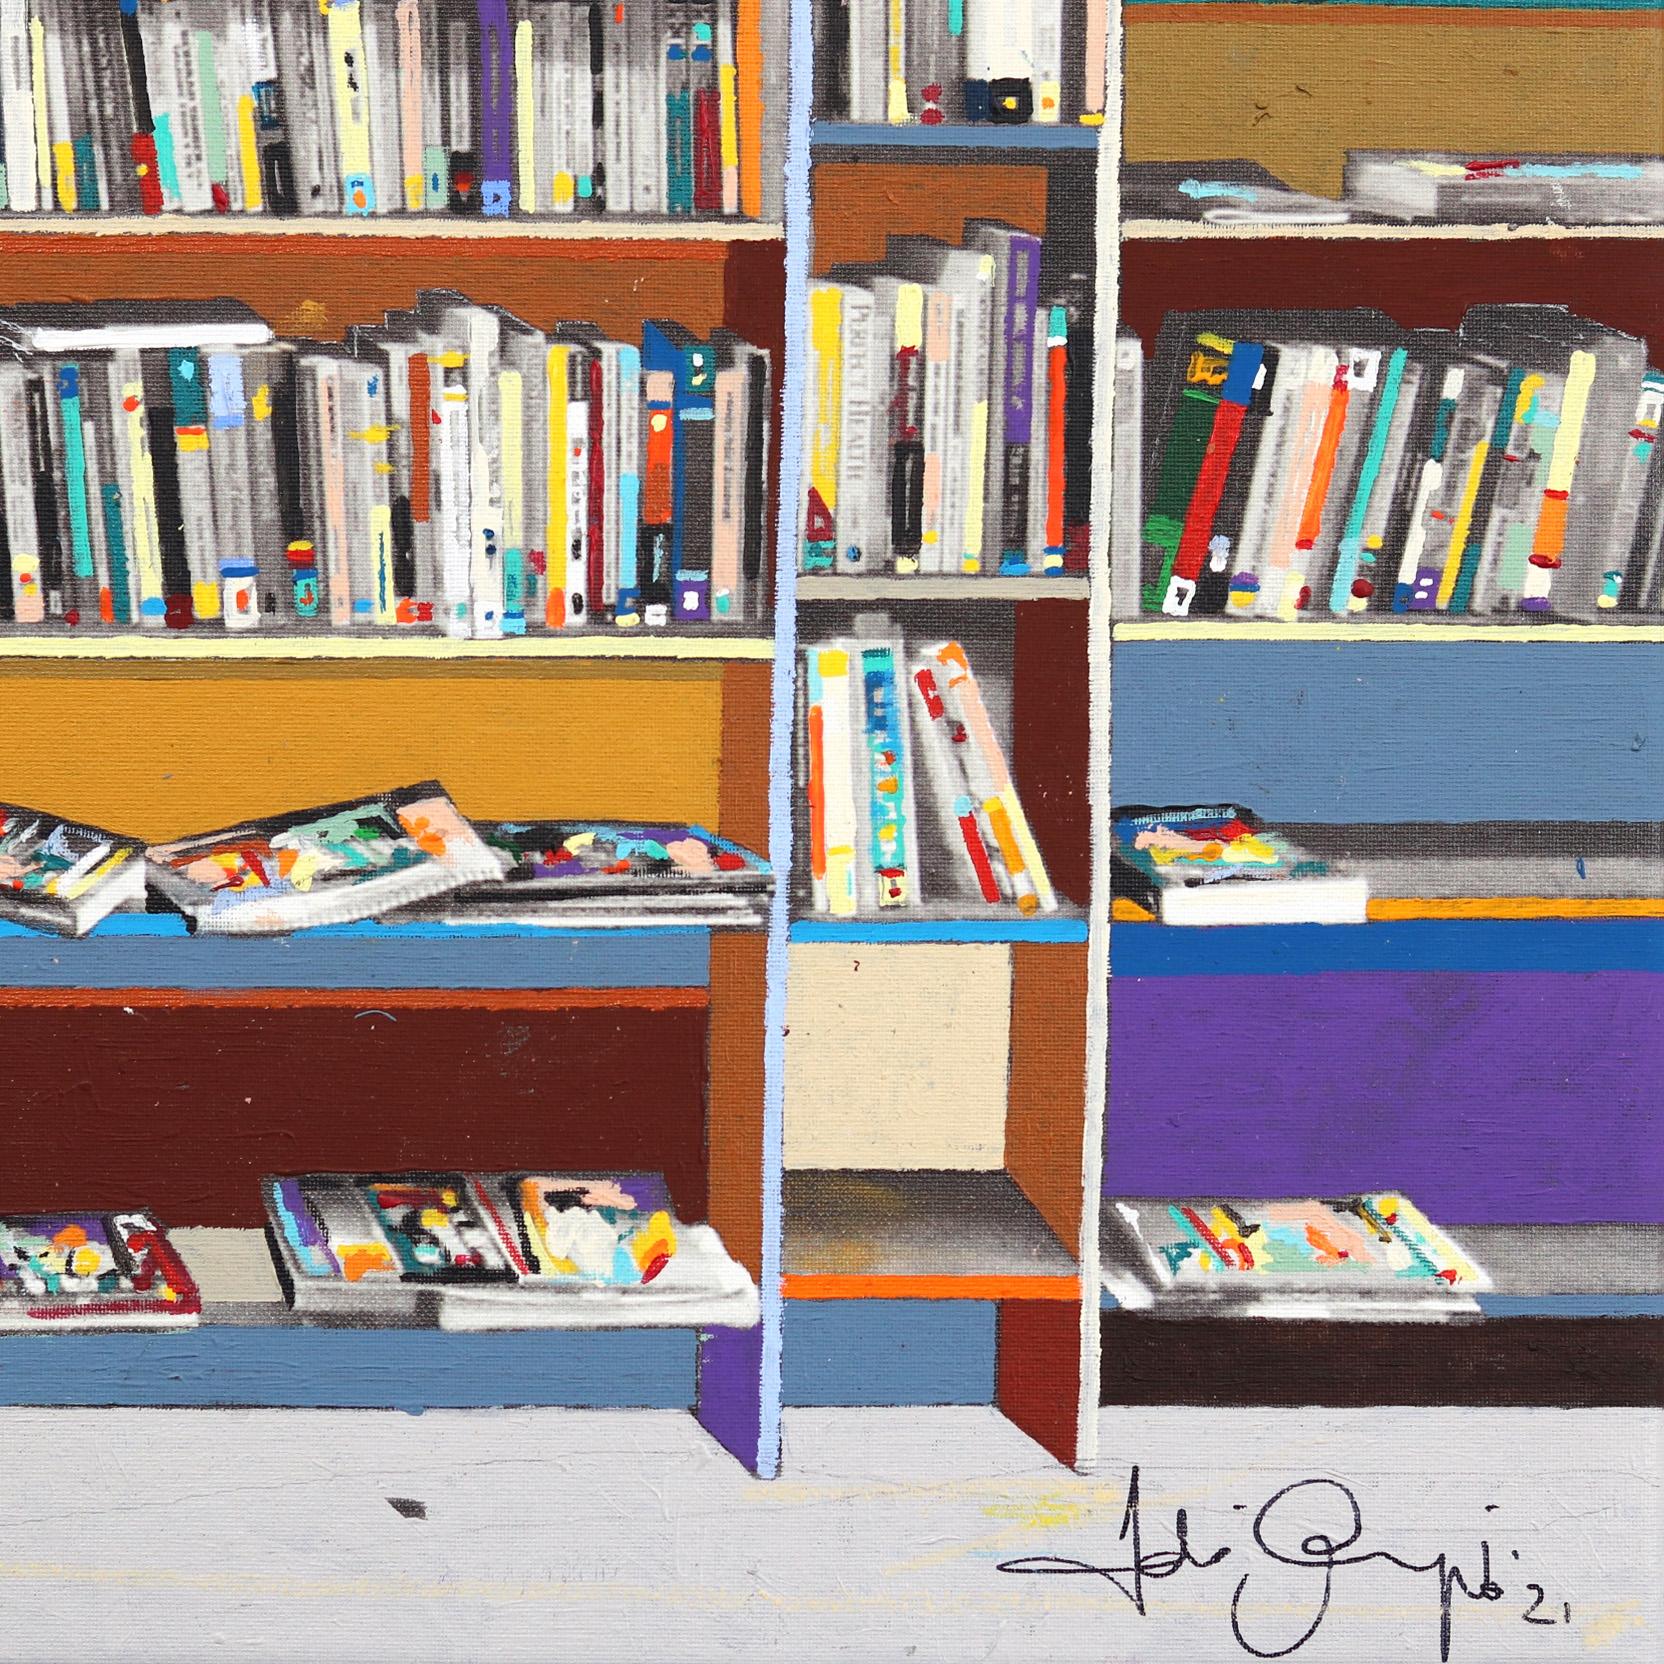 Last Bookshop in DTLA No. 7 - Colorful Authentic Urban Environment Painting 4